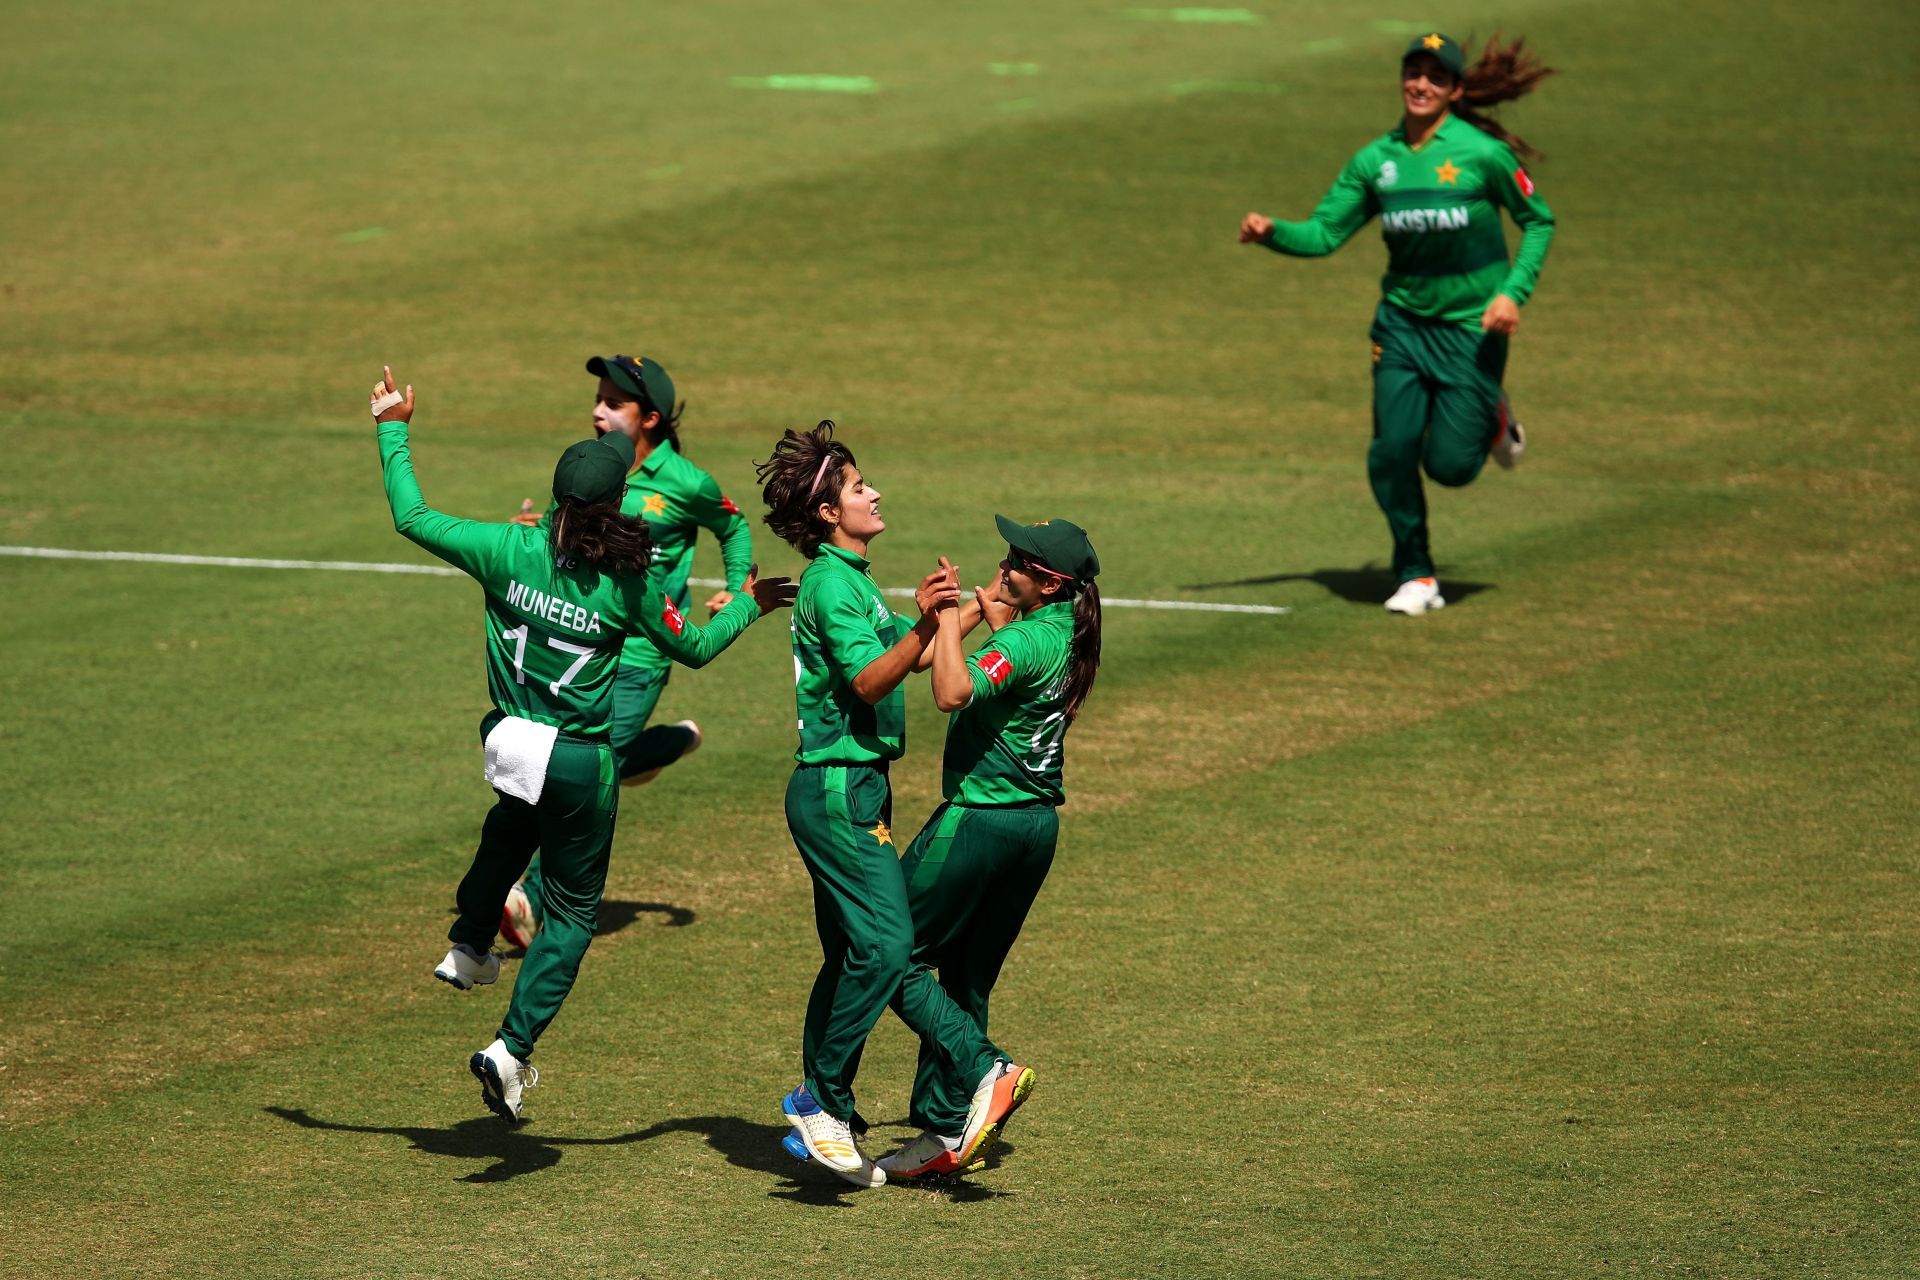 Pakistan will look to bag another win and strengthen their chances for qualification